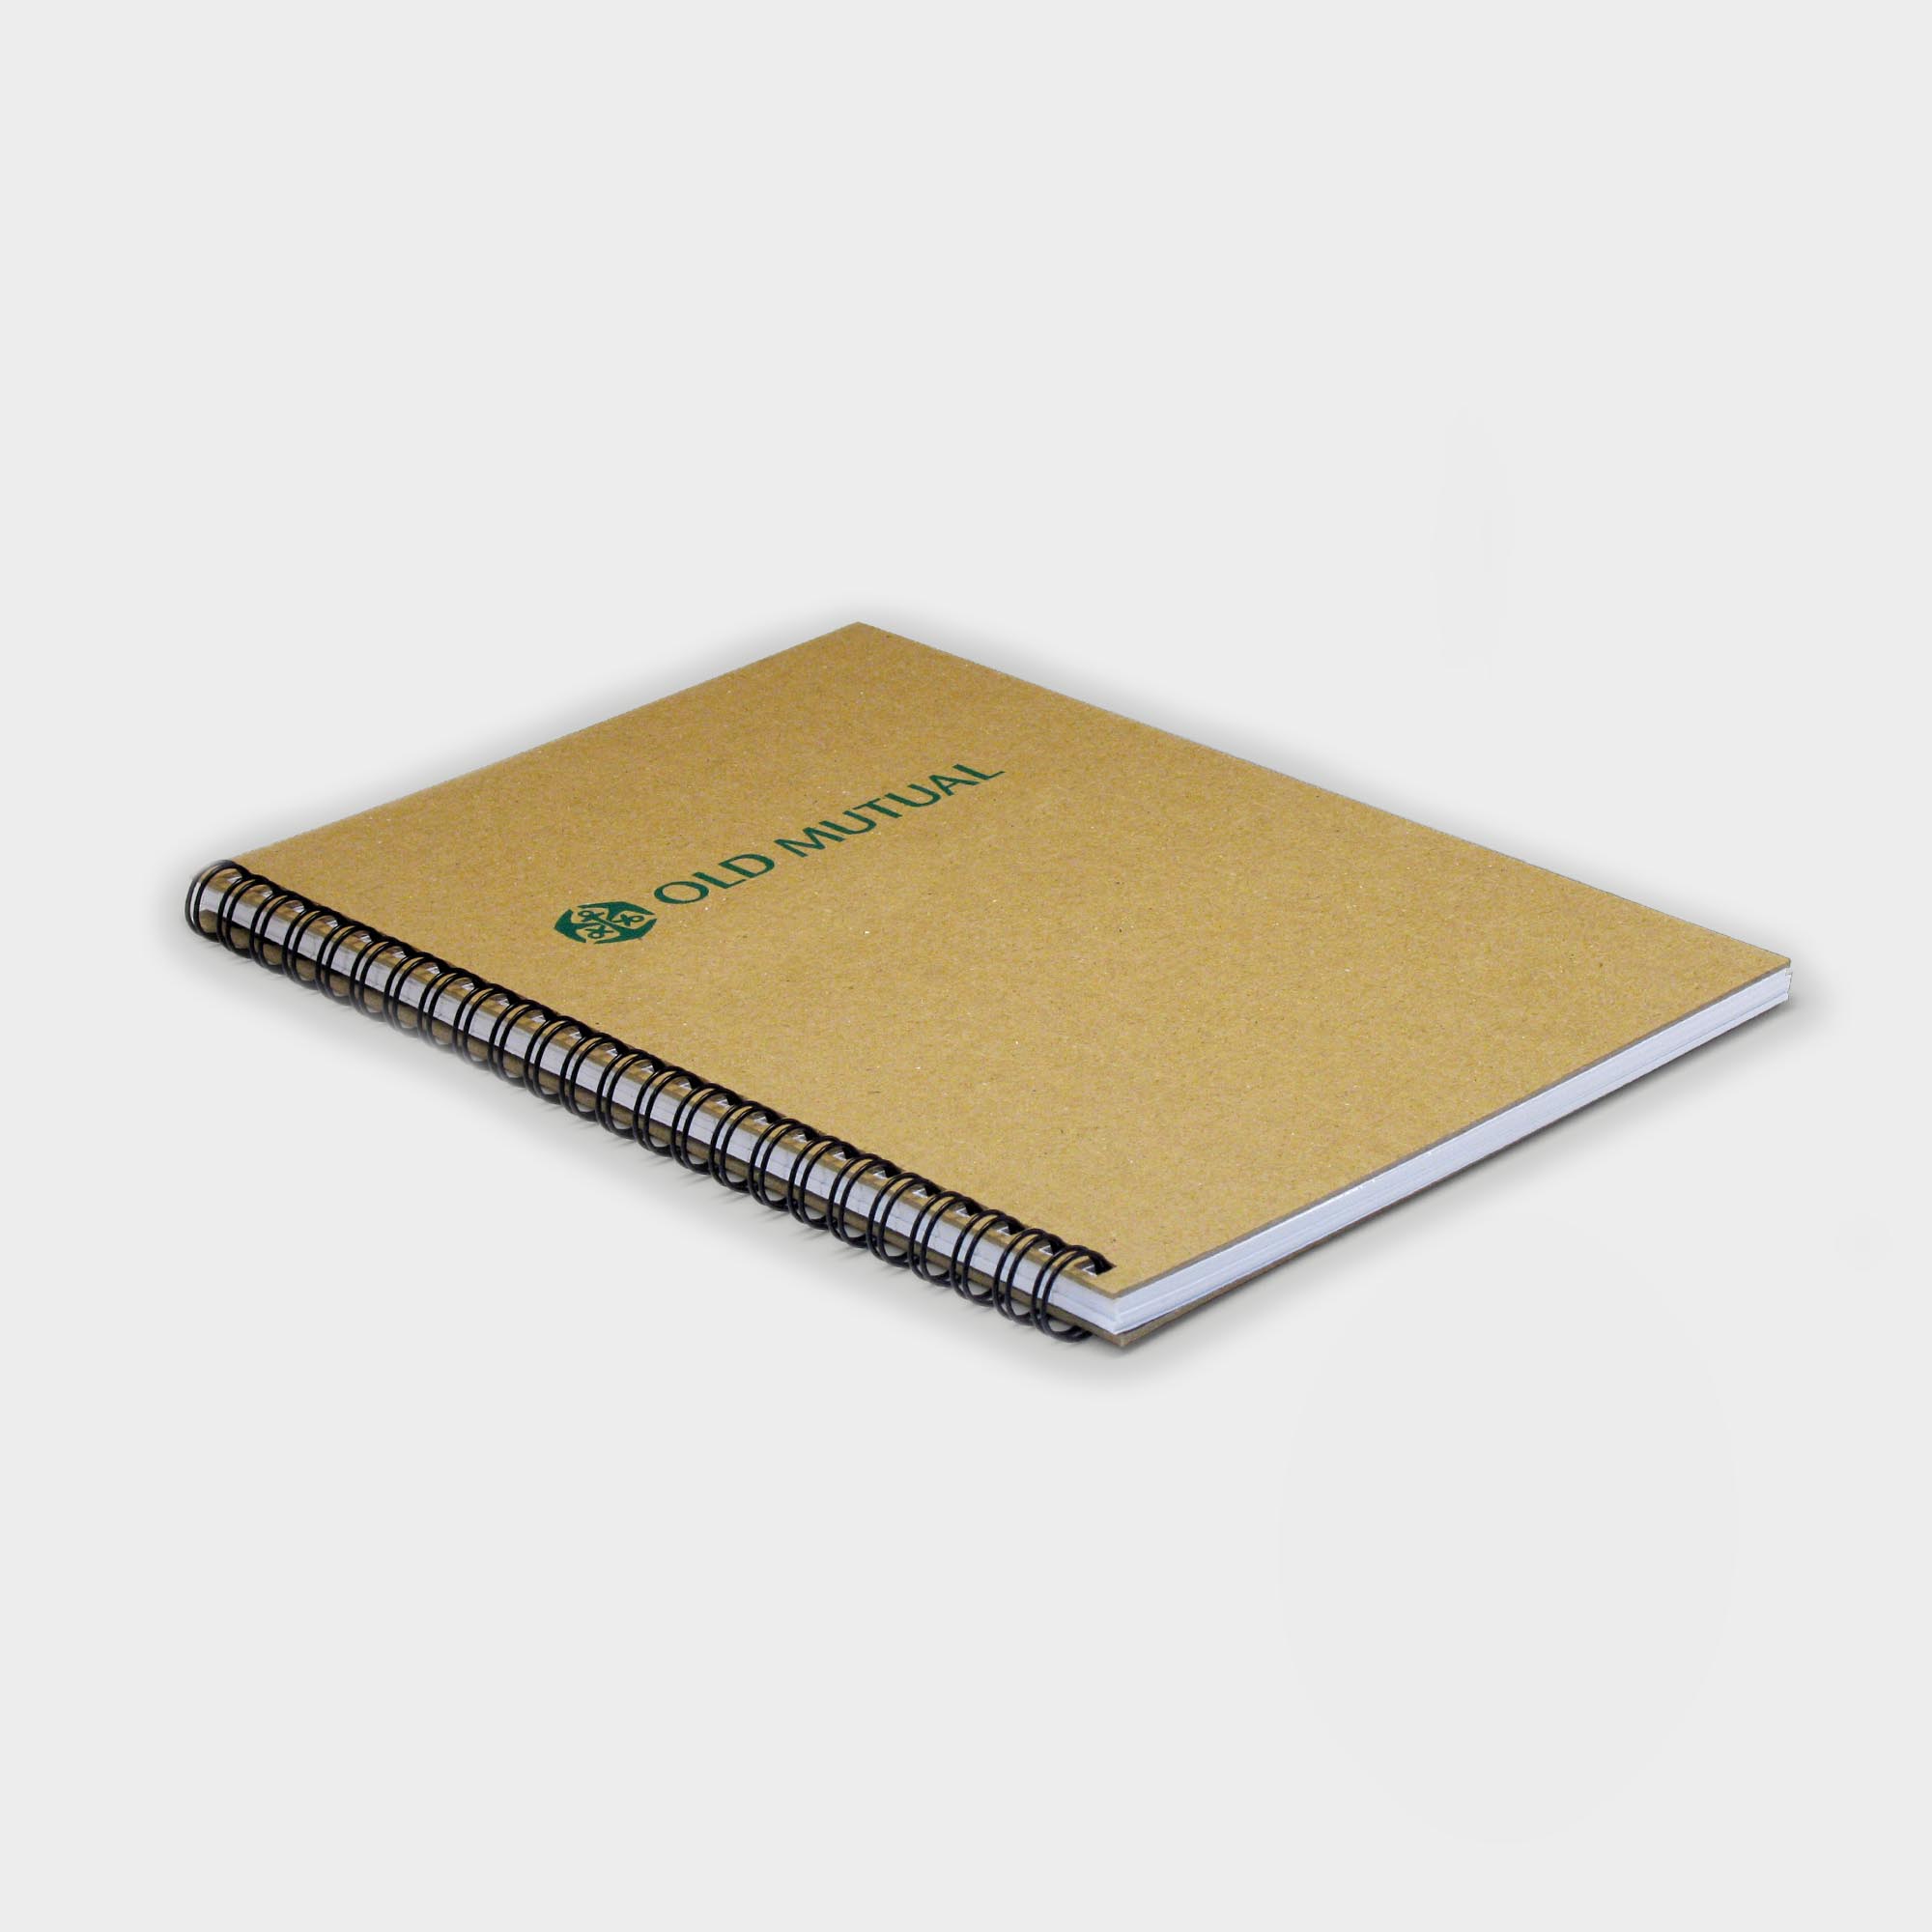 The Green & Good Wirebound Notebook is made from recycled paper - size A5. The front and back cover is made from recycled cardboard (1200 microns), the sheets are 80gsm. Comes wirebound with 50 sheets as standard. Please contact us if you require a bespoke number of sheets.